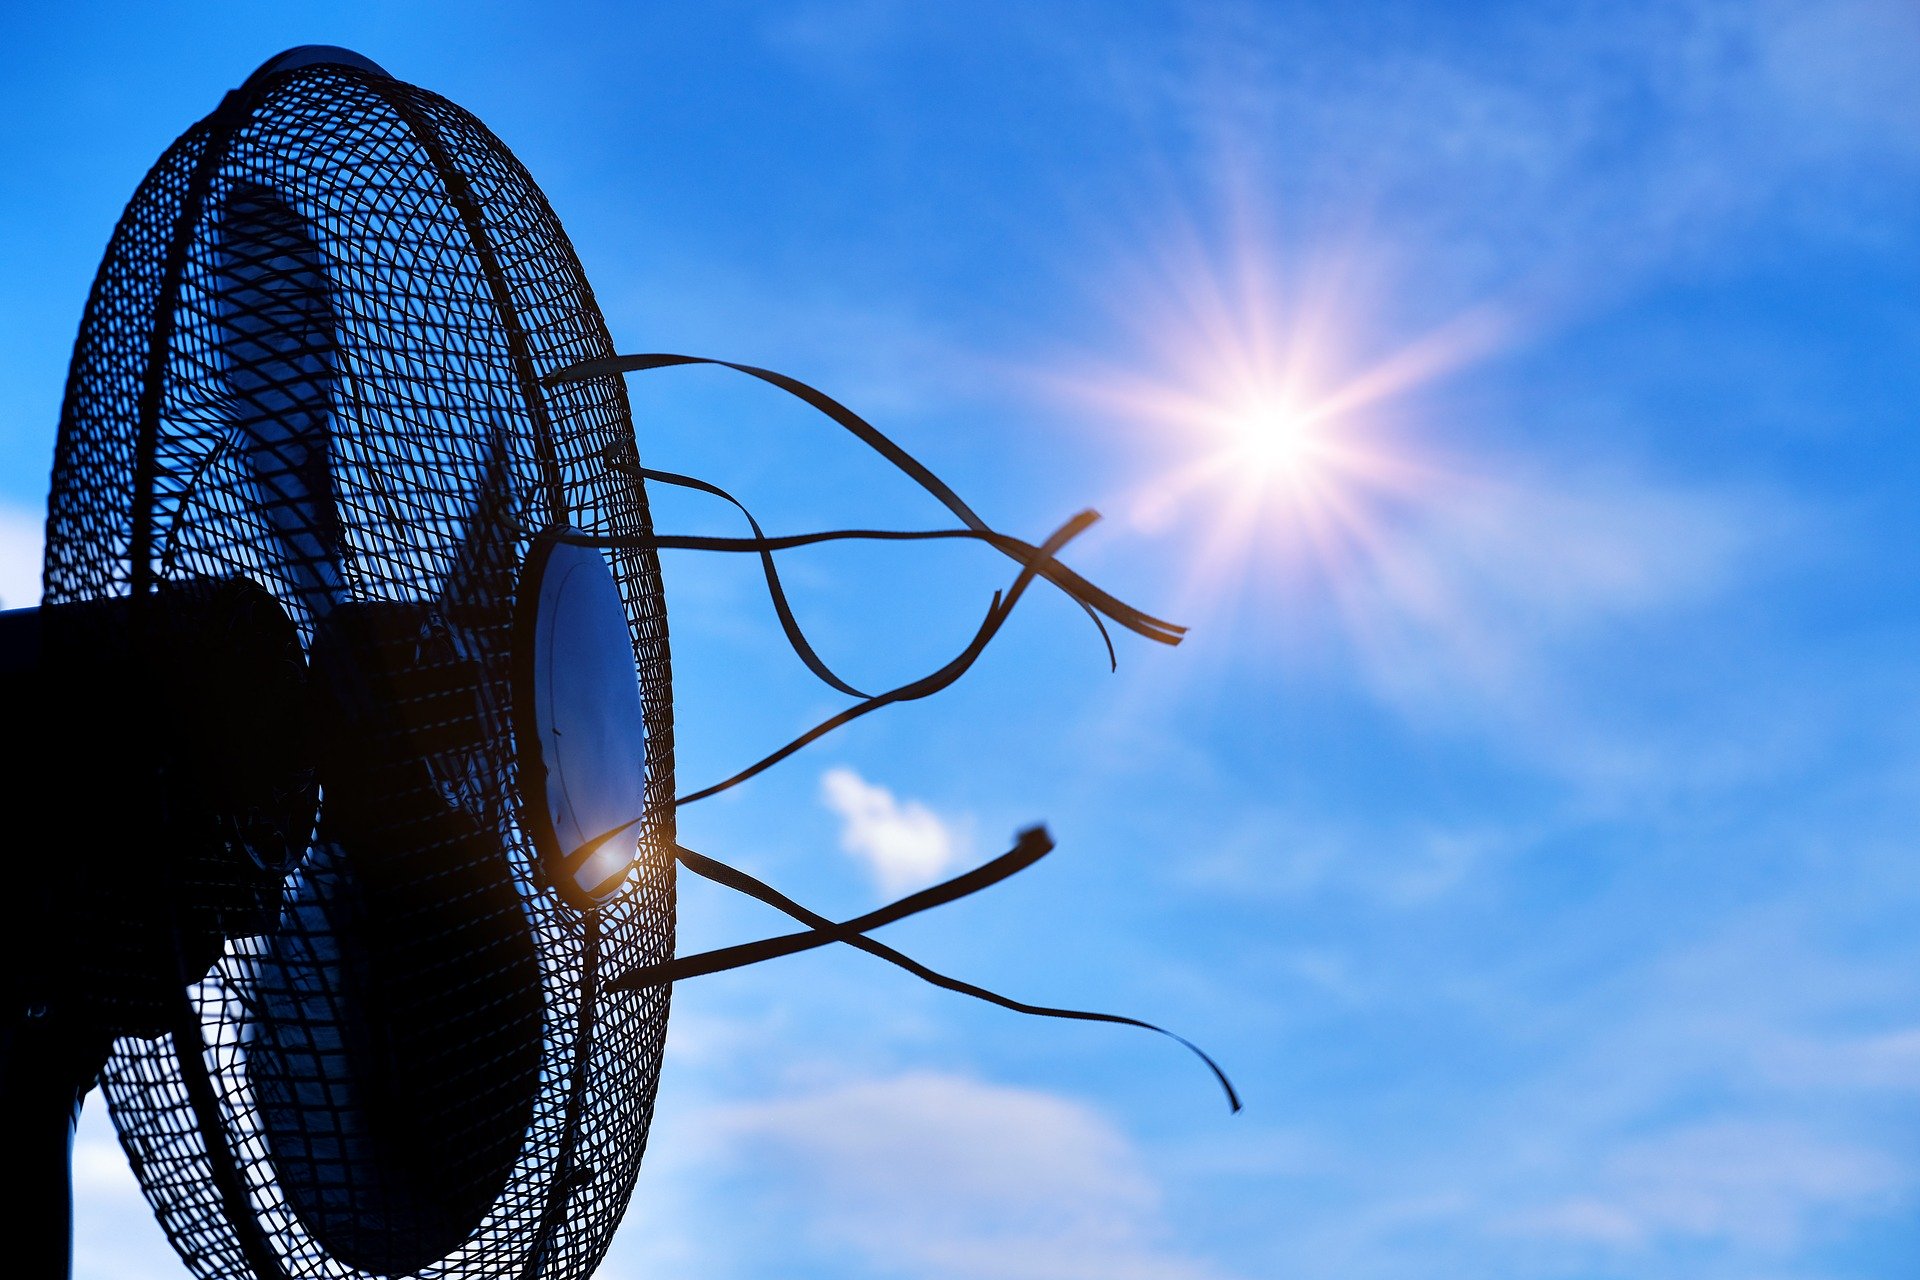 Photograph of a dark coloured electric fan facing sideways with a blue sky and sun in the background